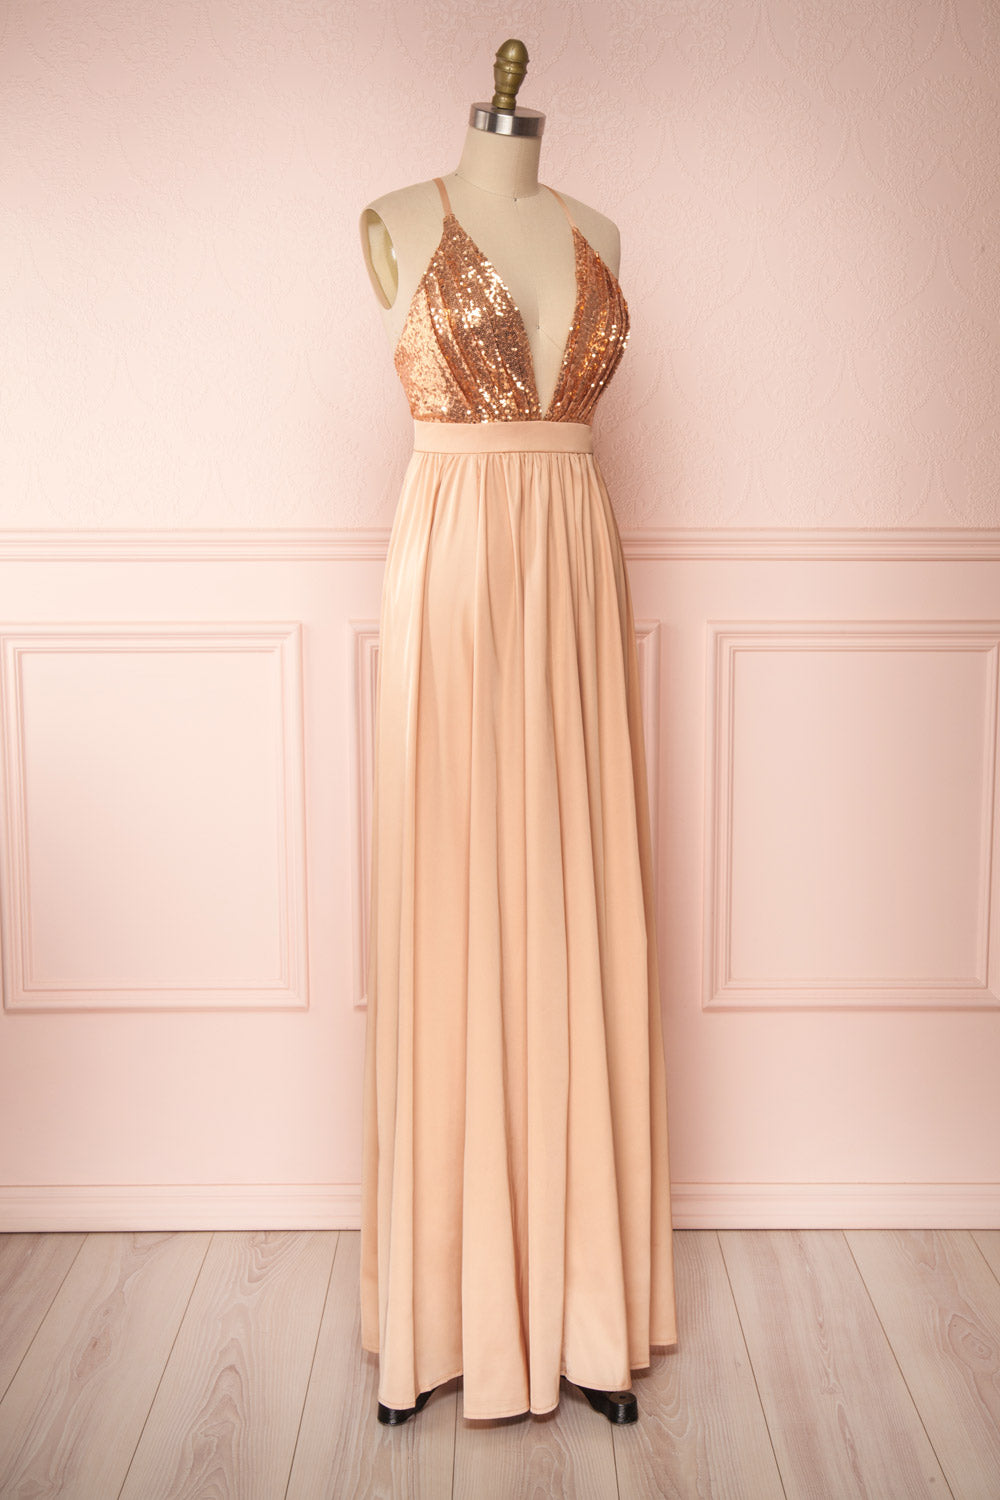 Mana Rosegold Maxi Dress w/ Sequins | Boutique 1861 side view